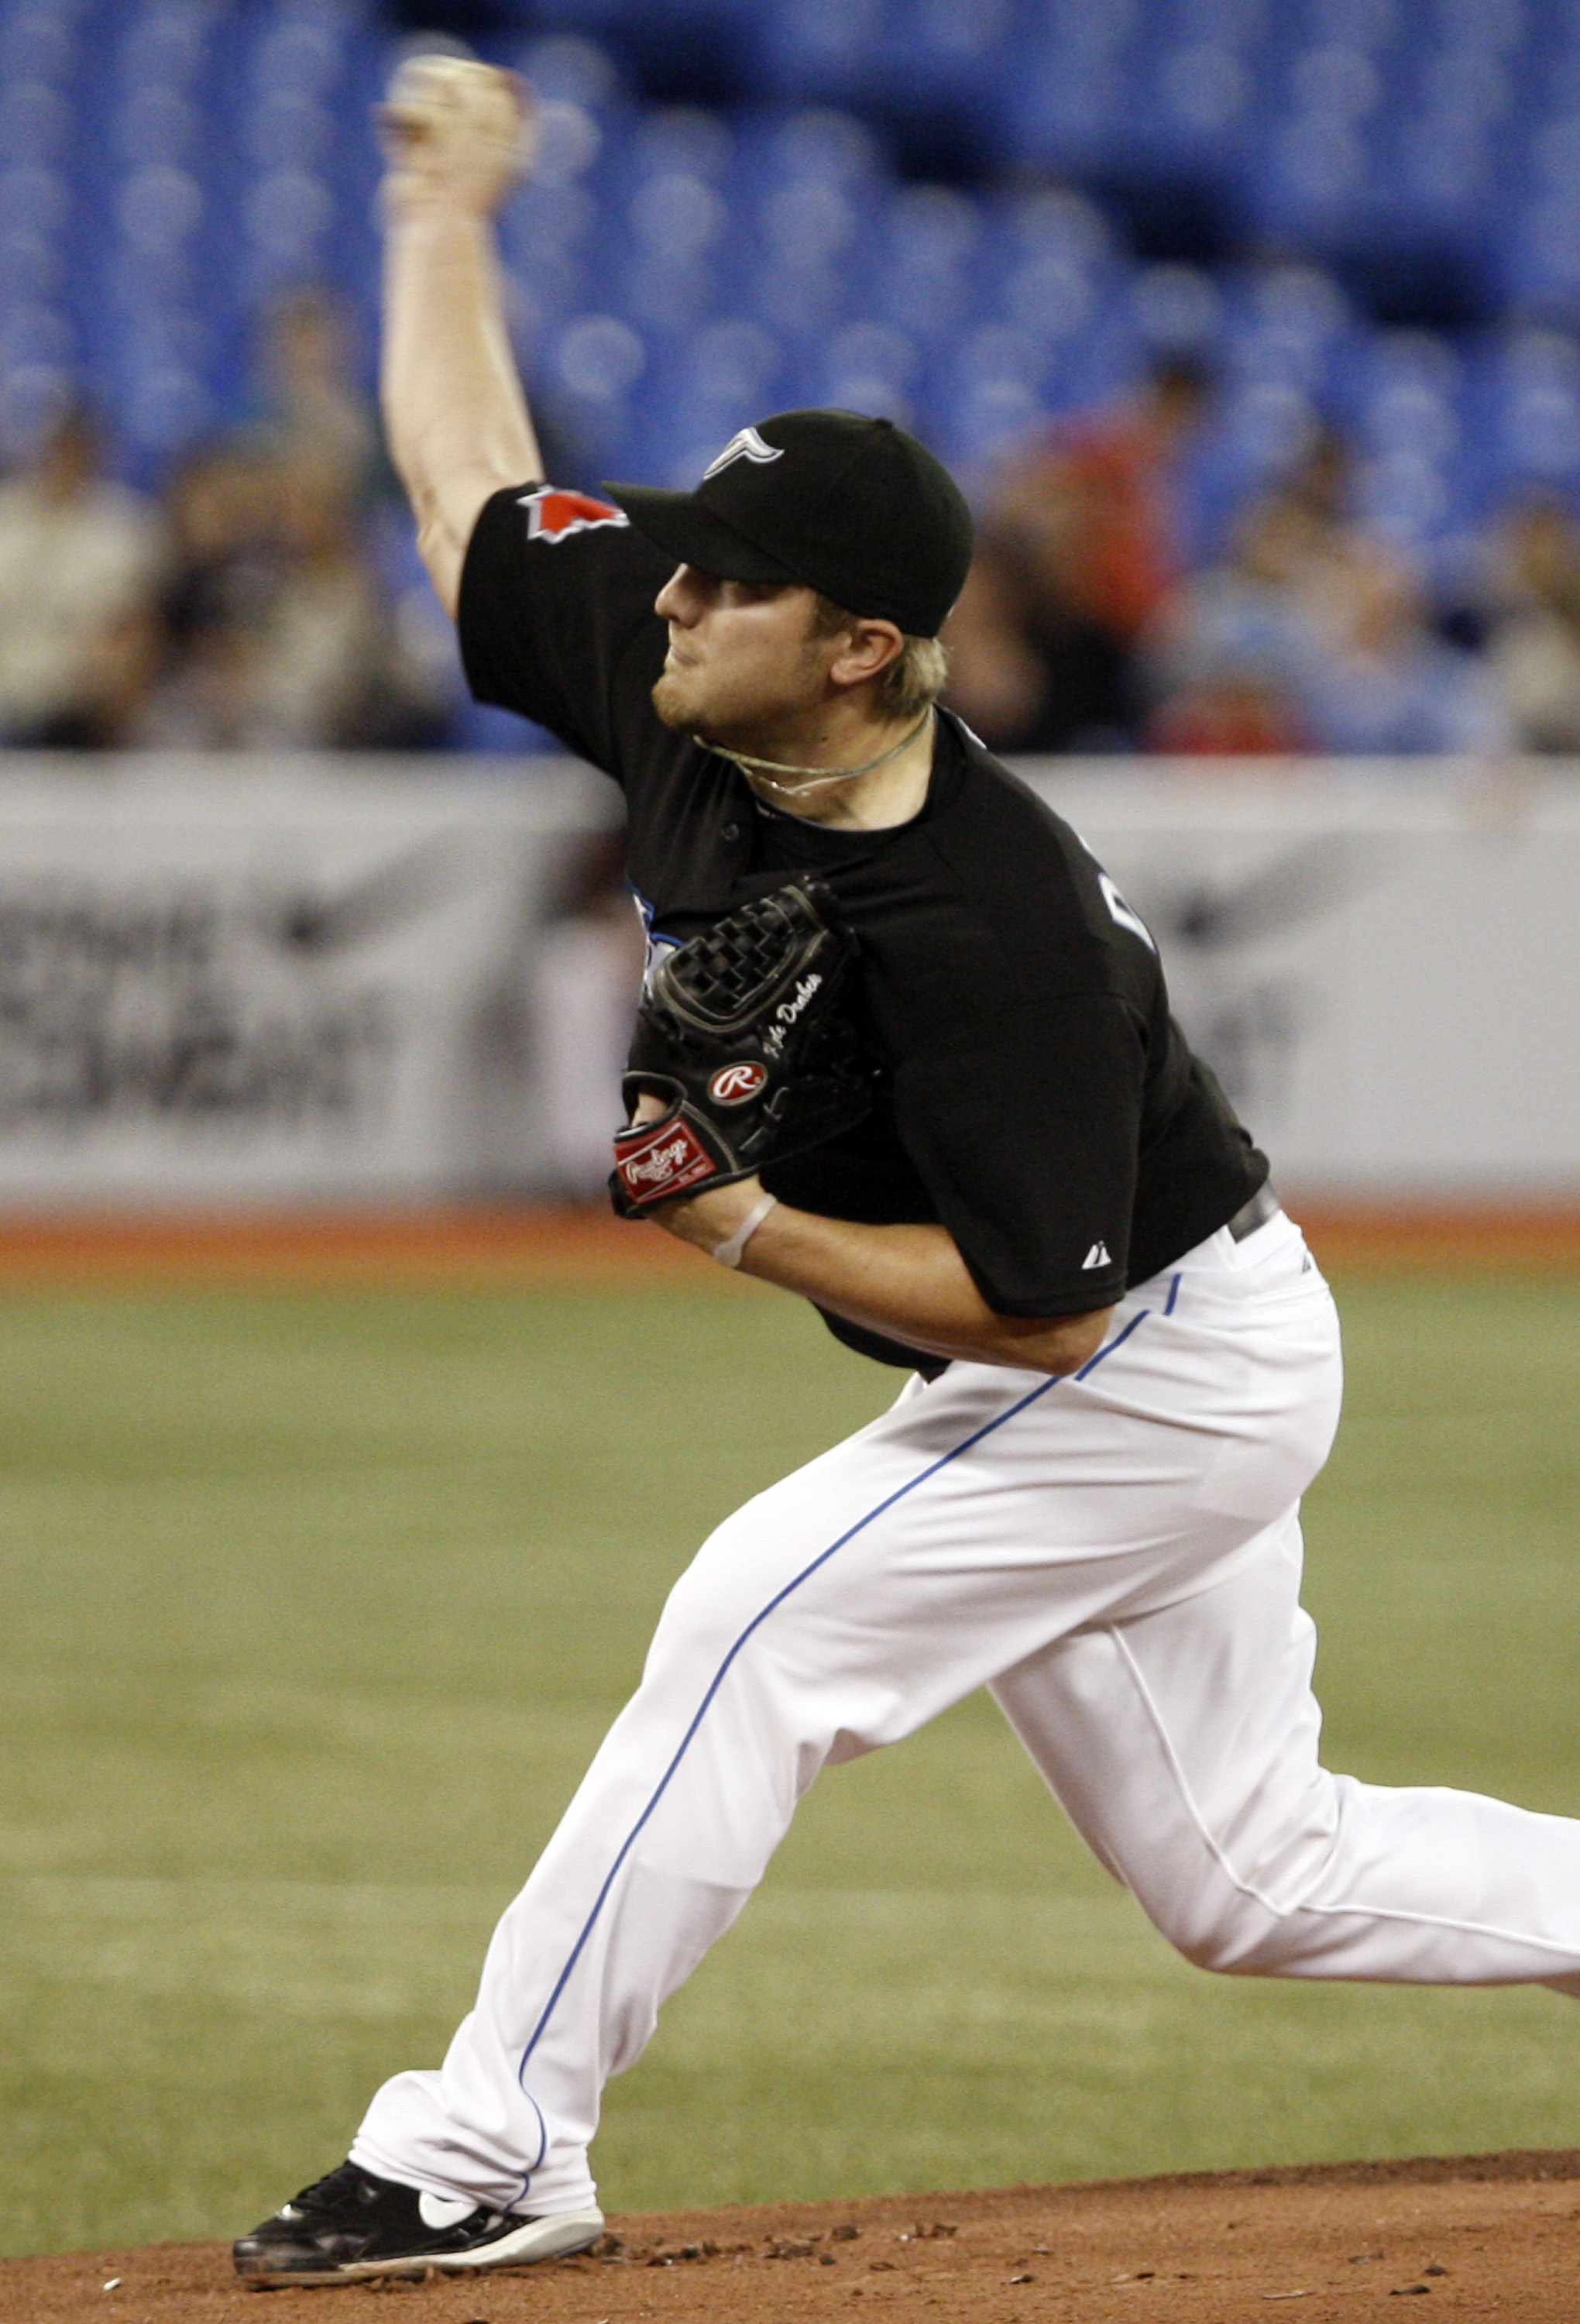 Kyle Drabek aims to establish himself in the Blue Jays rotation in 2011.